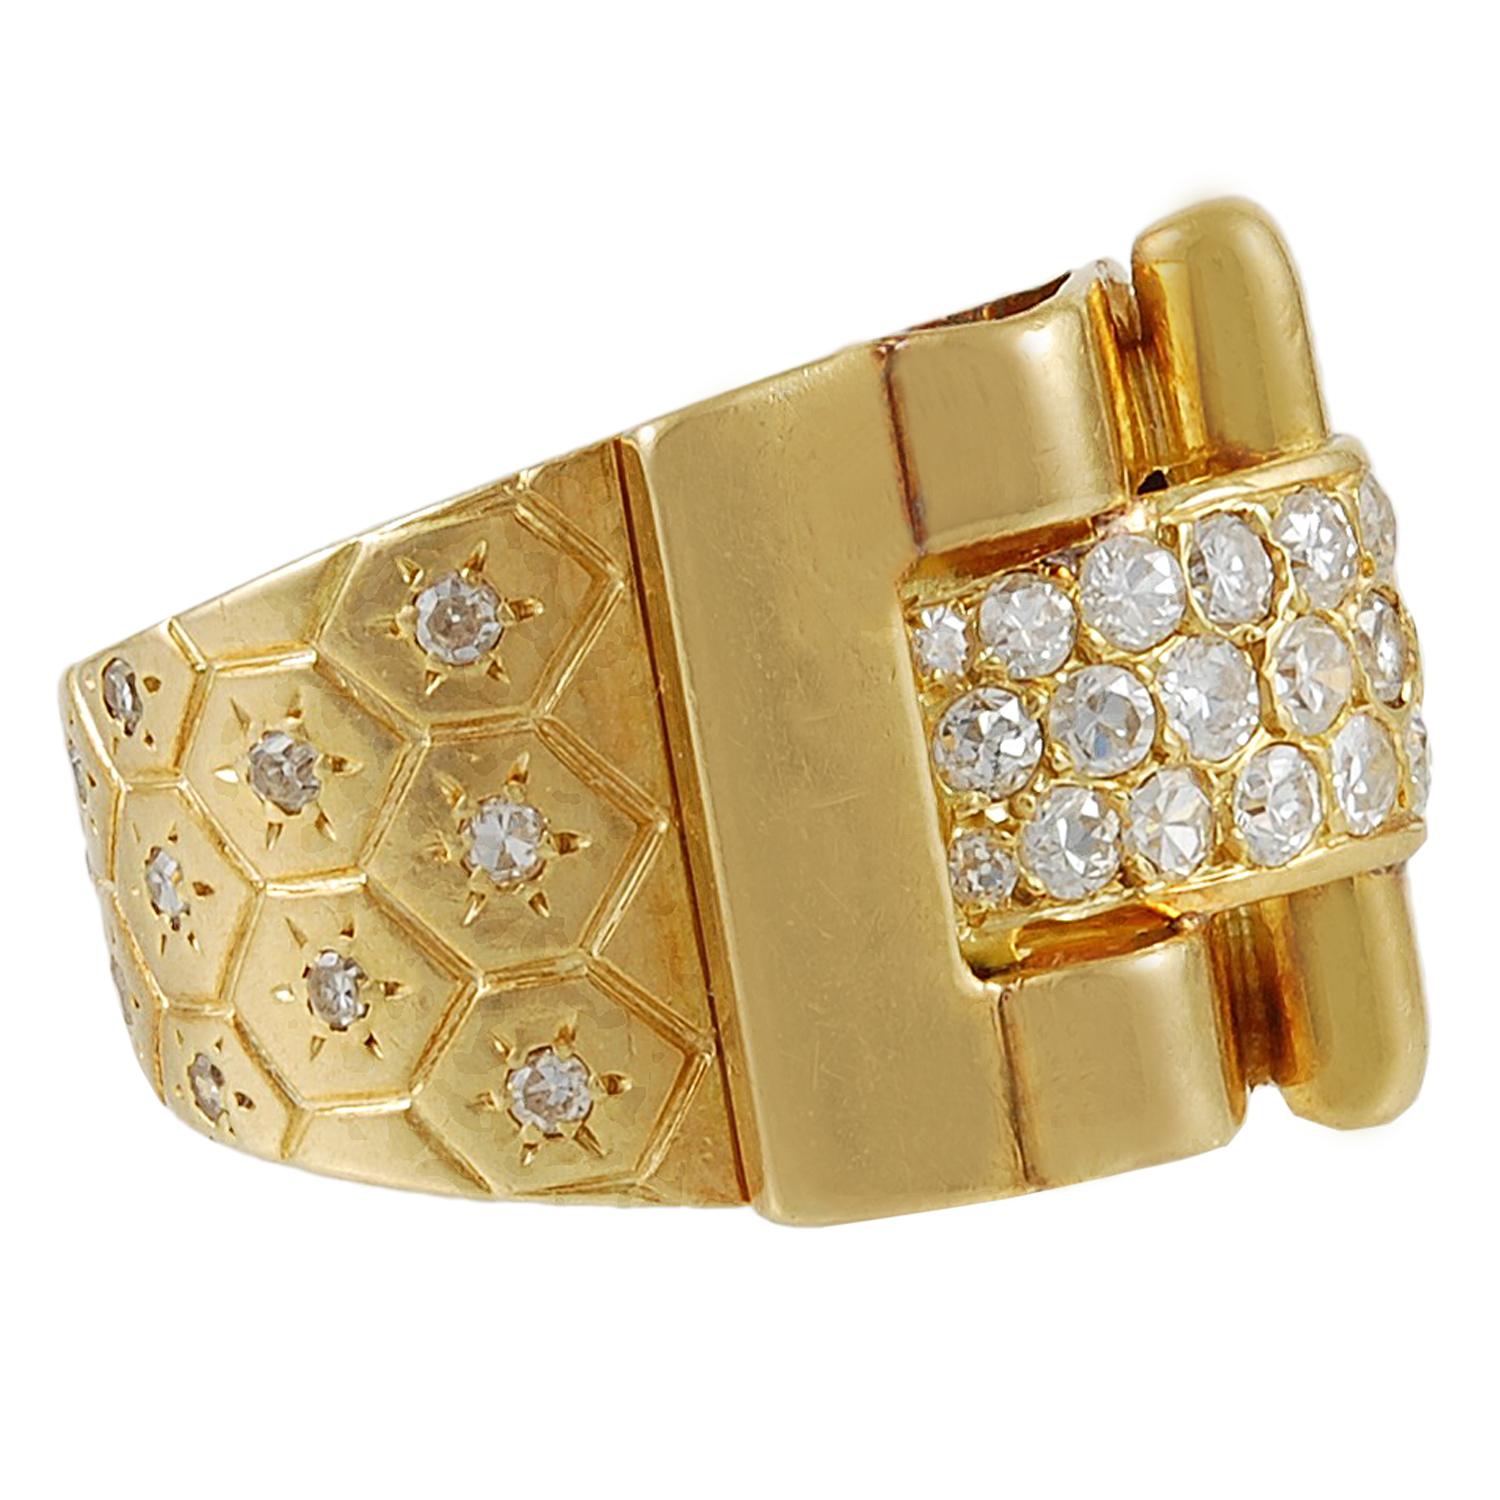 Part of the iconic Ludo Hexagone collection by Van Cleef & Arpels, which was created as a  reference to Louis Arpels, who was known to his peers as “Ludo,” this 18k yellow gold ring features a buckle motif adorned by round brilliant-cut diamonds